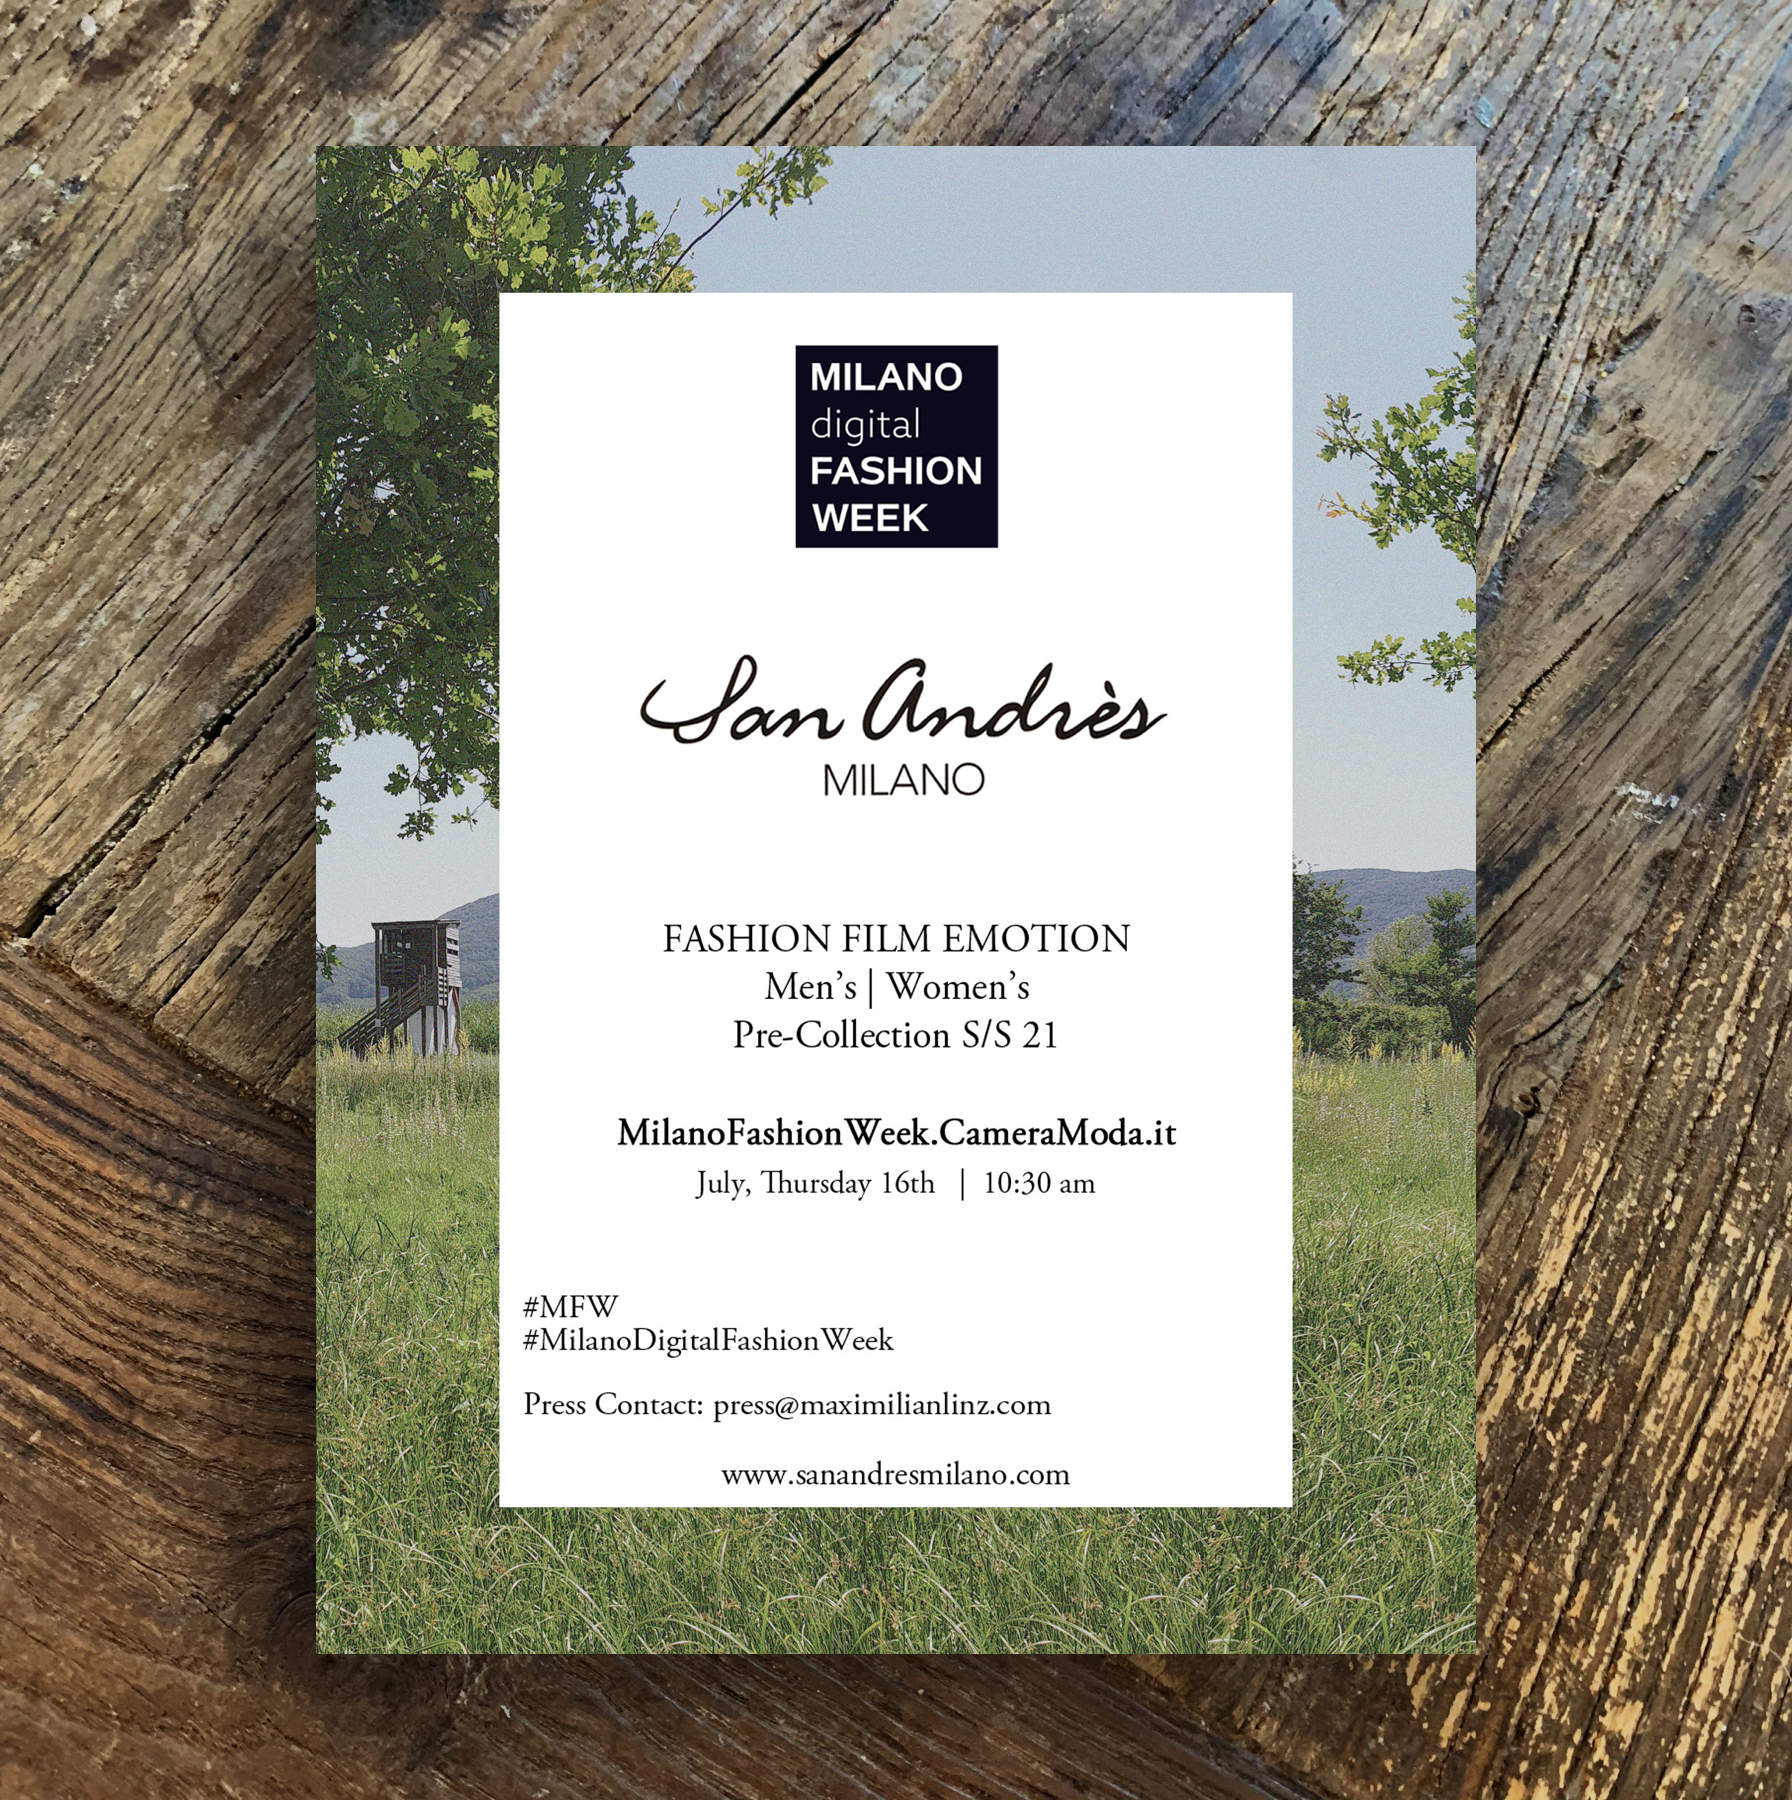 The Best of Spring 2020 Men's Show Invitations  Fashion show invitation,  Invitations, Save the date invitations